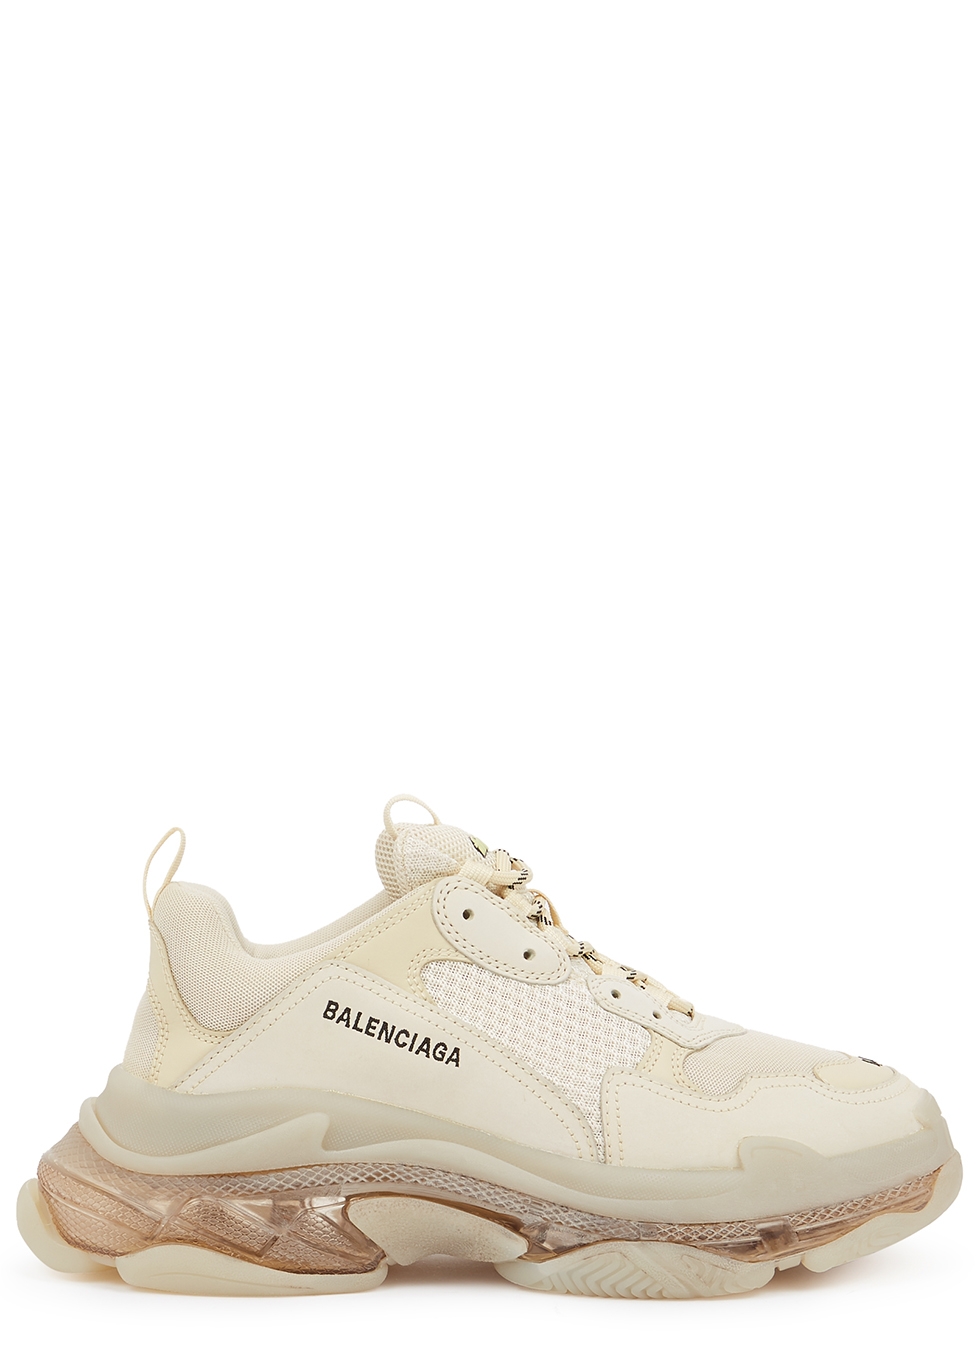 Real vs fake balenciaga triple s sneakers in white detail and